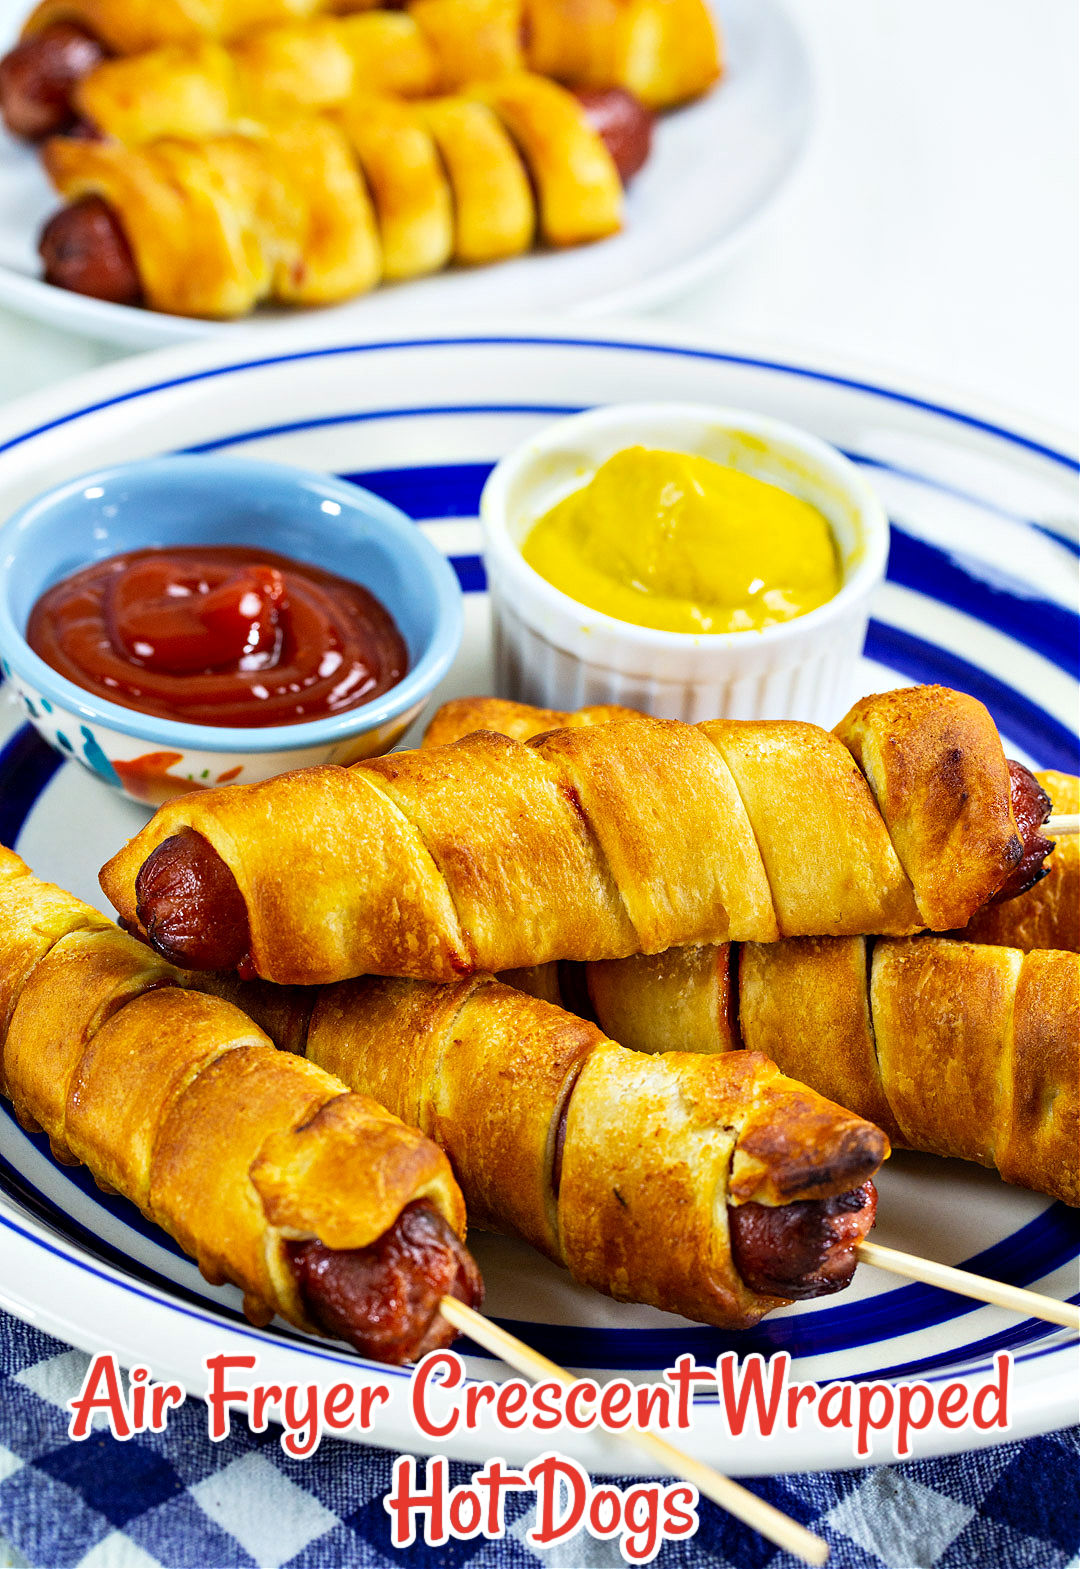 Air Fryer Crescent Wrapped Hot Dogs on a plate.